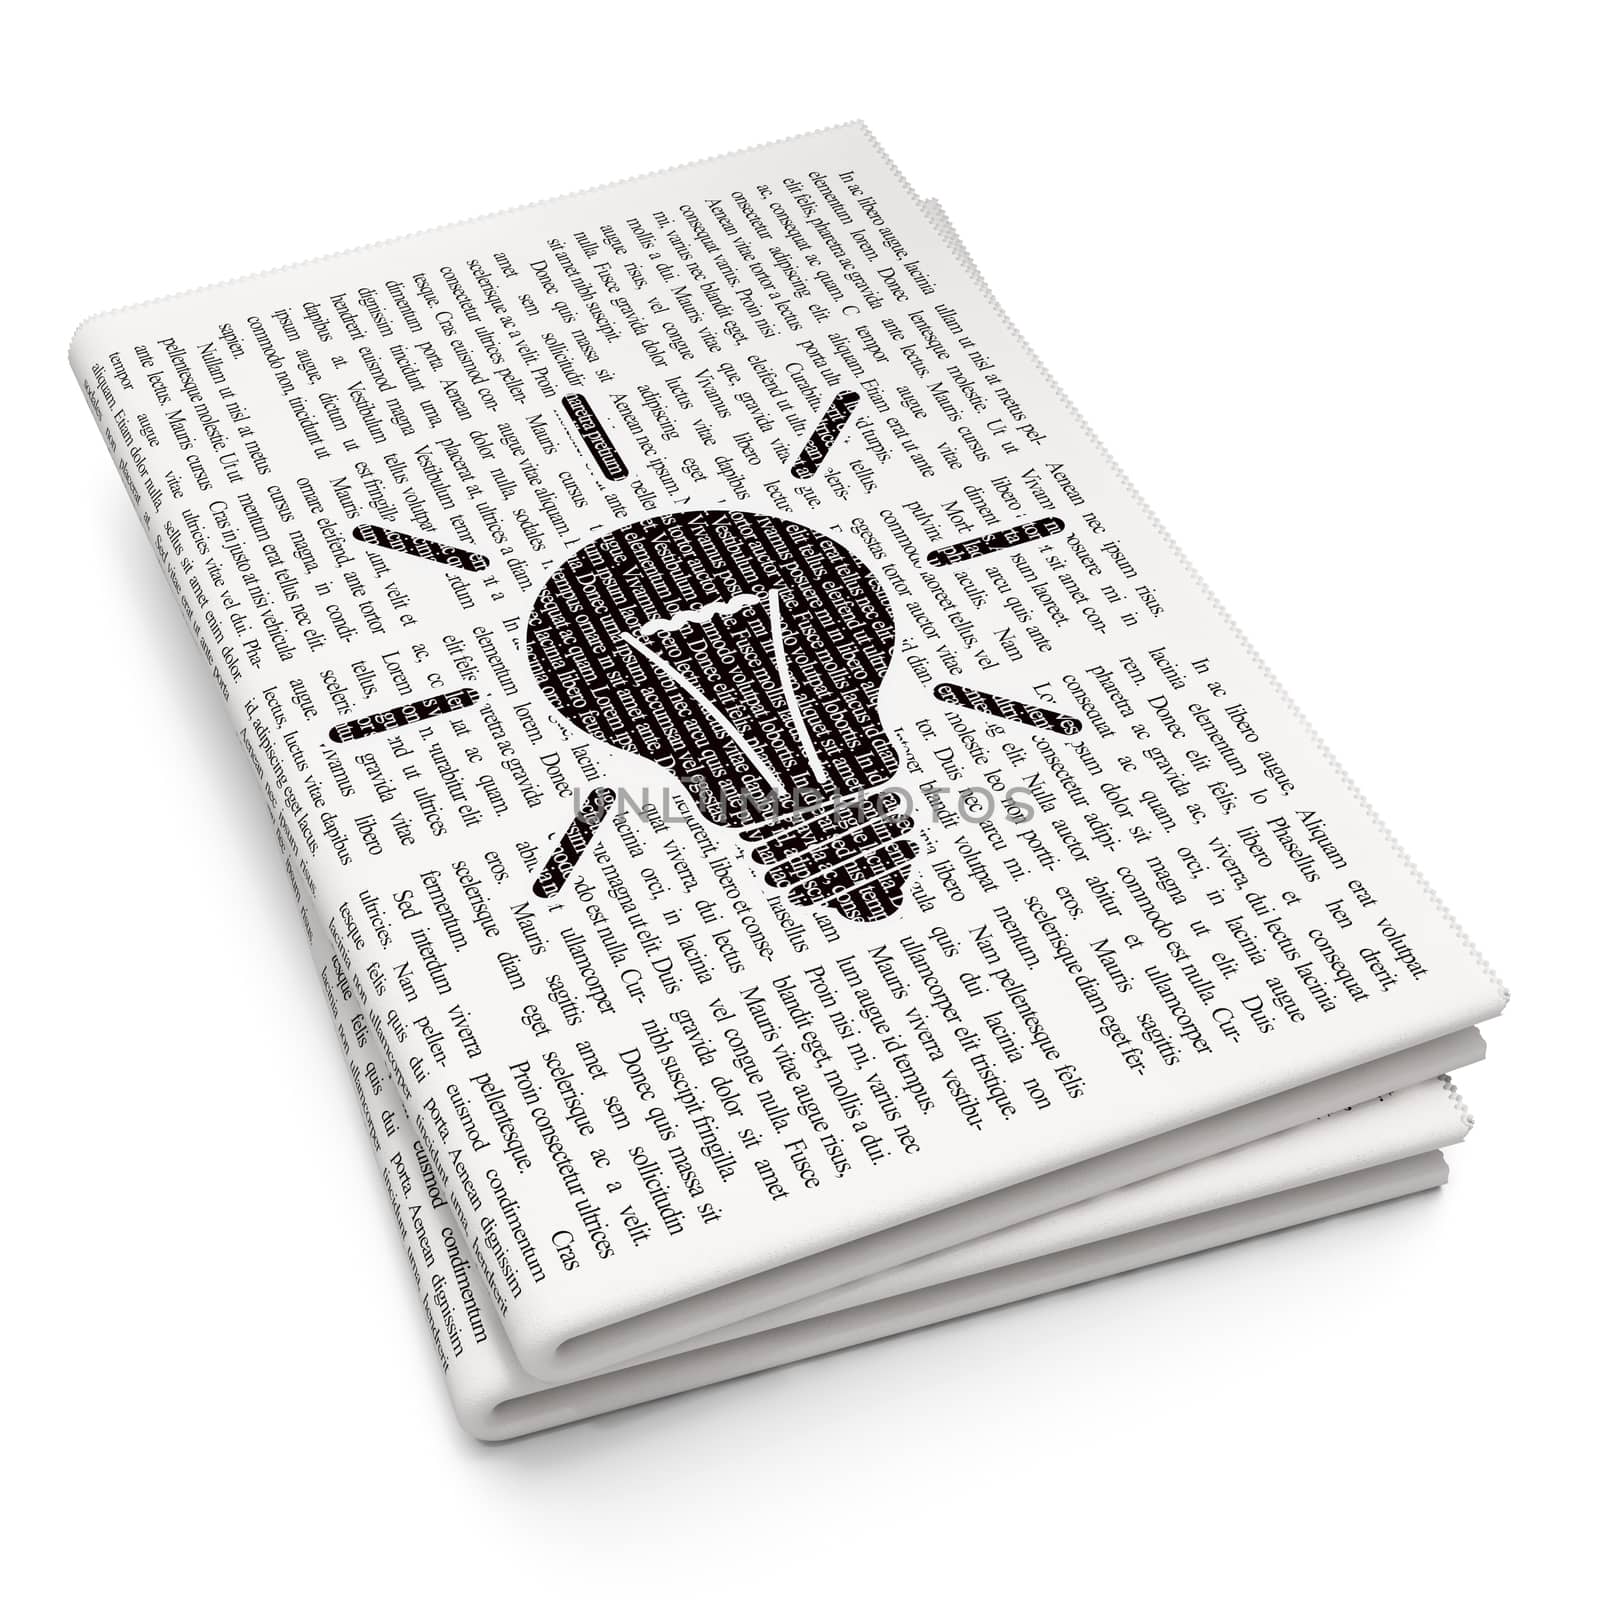 Business concept: Pixelated black Light Bulb icon on Newspaper background